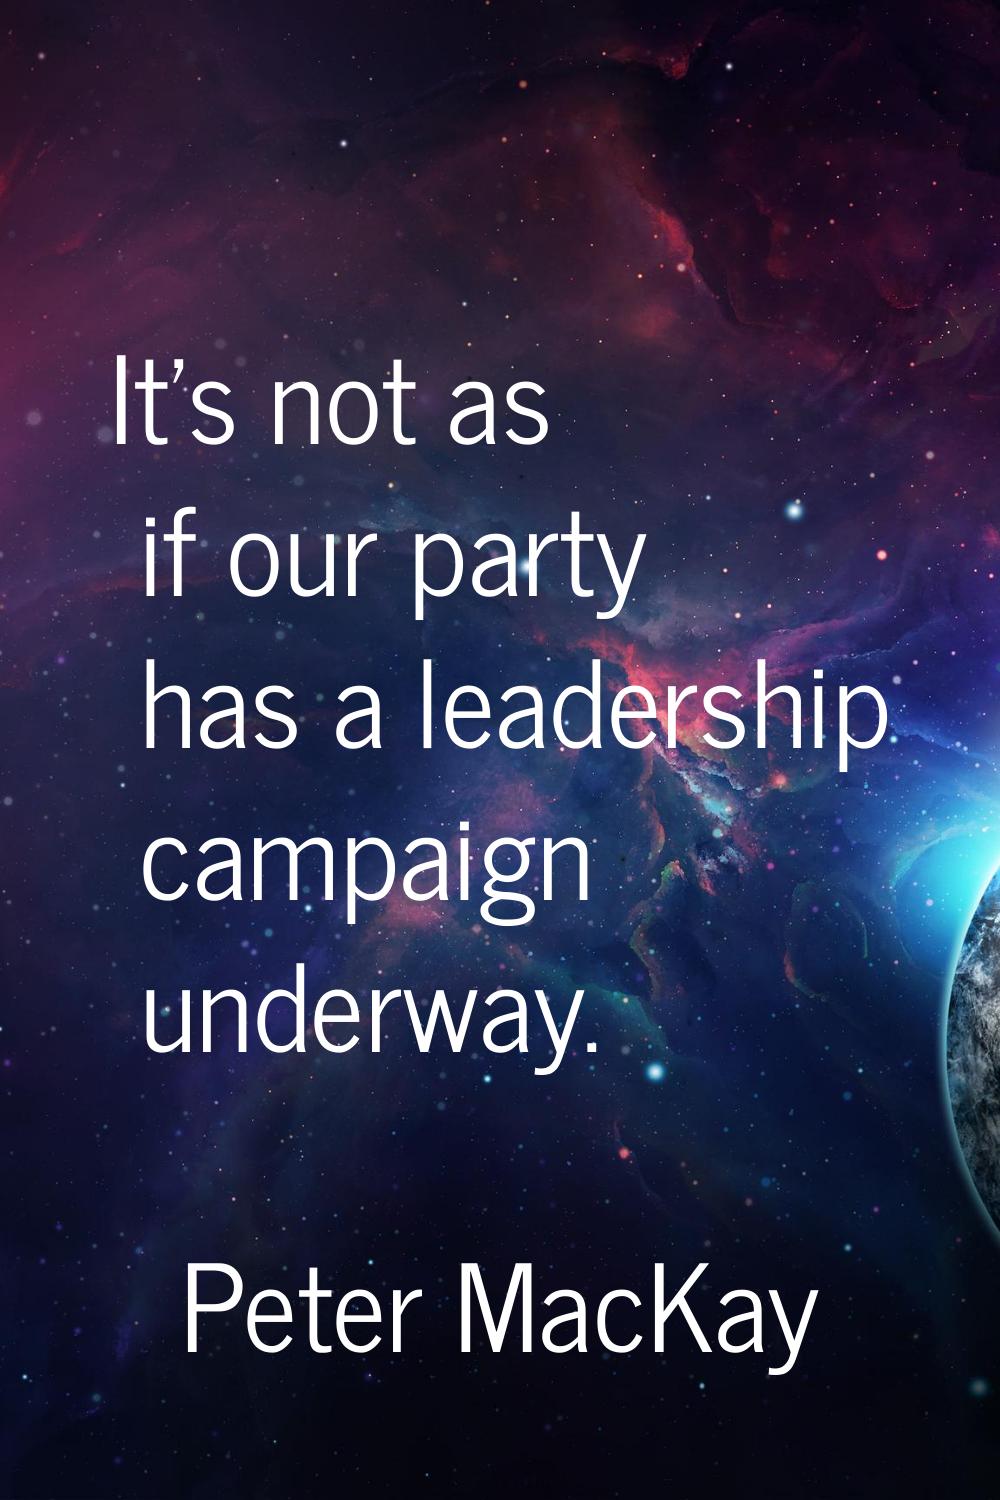 It's not as if our party has a leadership campaign underway.